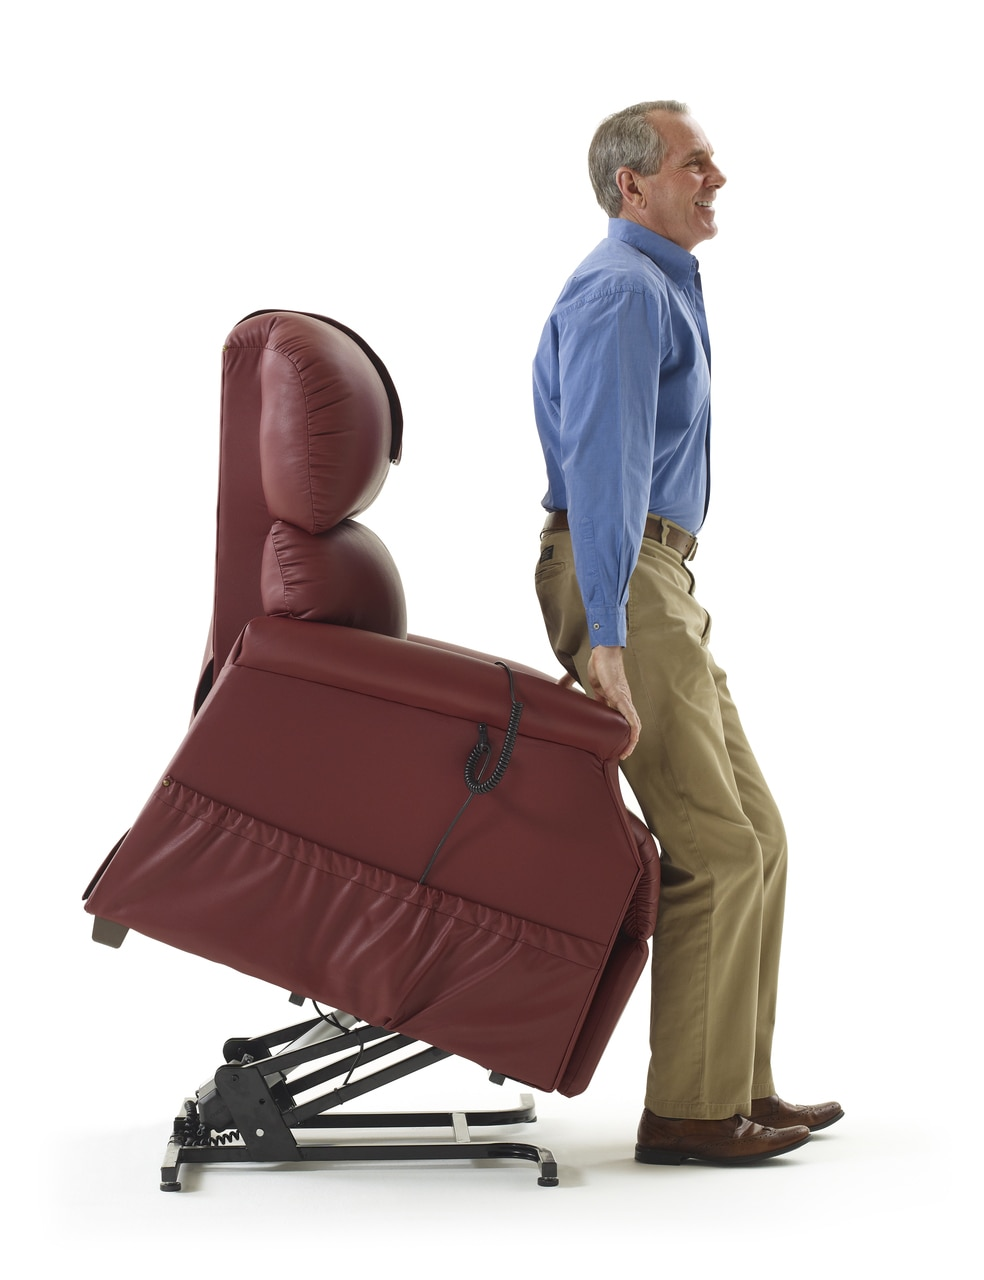 Lift Chair Help Mobility